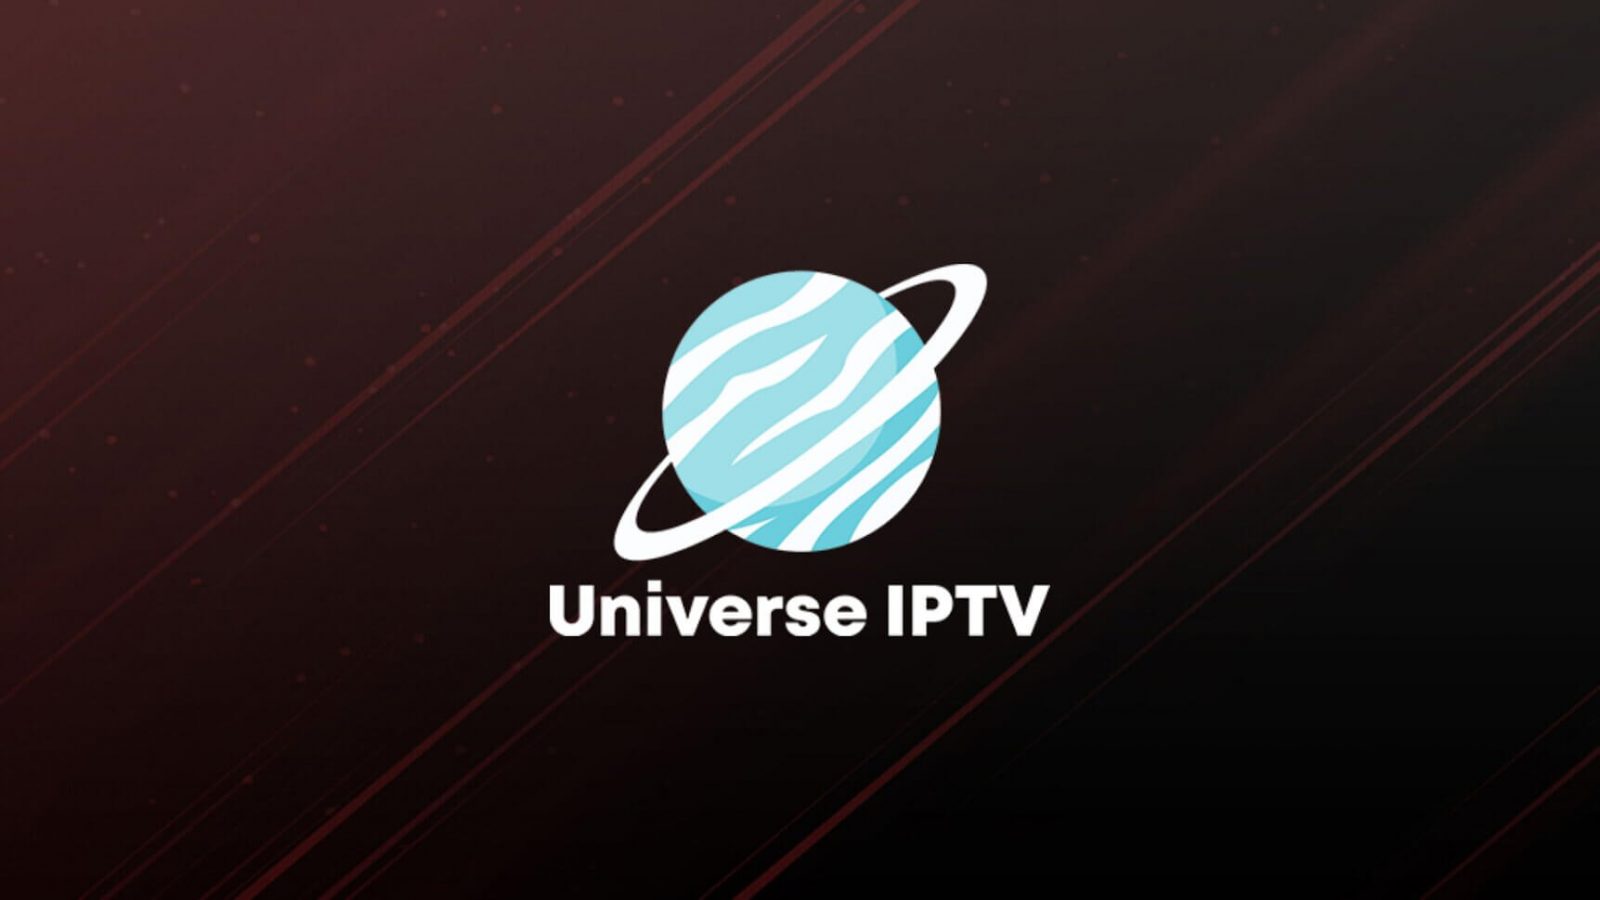 Universe IPTV: Features, Pricing, and Installation Guide